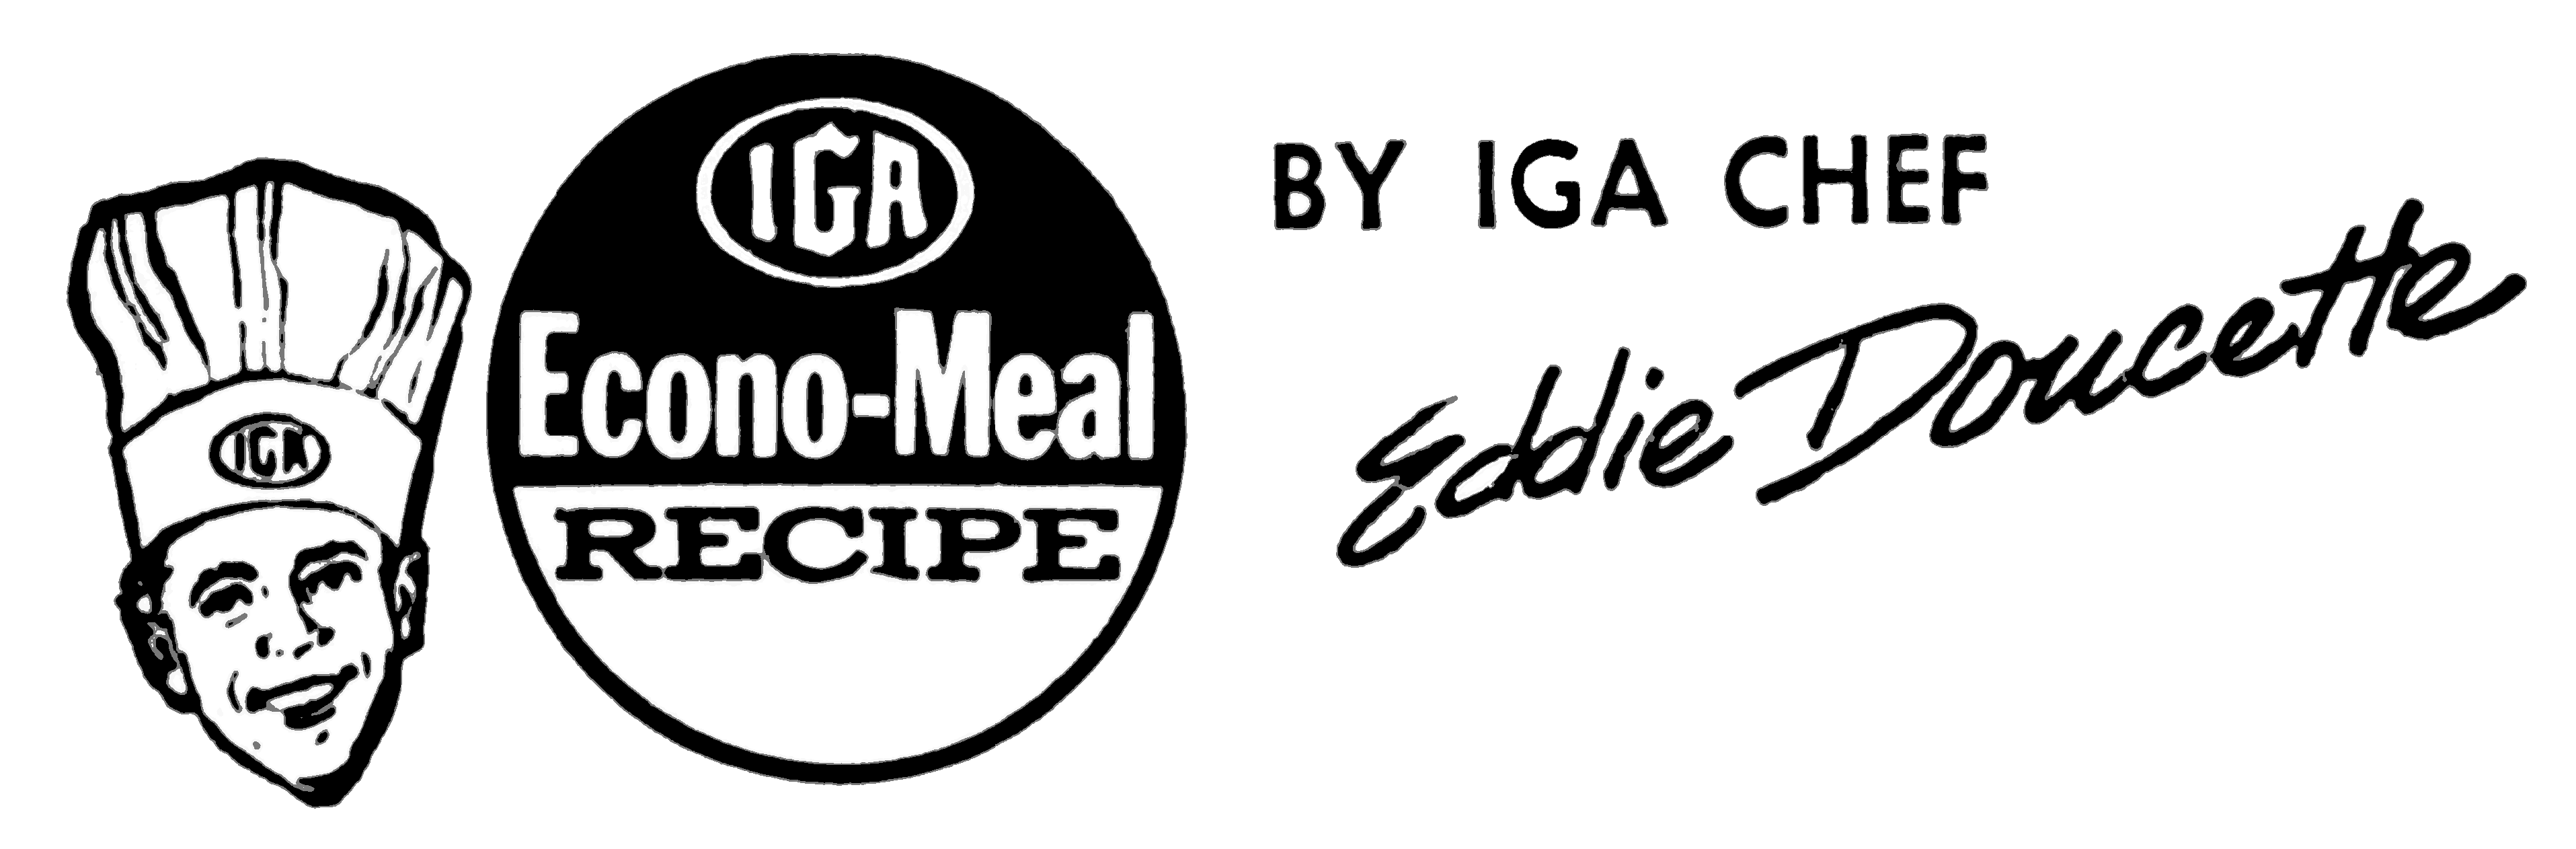 Econo-Meal Recipe by IGA Chef Eddie Doucette: A wider Econo-Meal ad featured not just the logo but also Eddie Doucette and his signature.; Eddie Doucette; IGA Food Stores